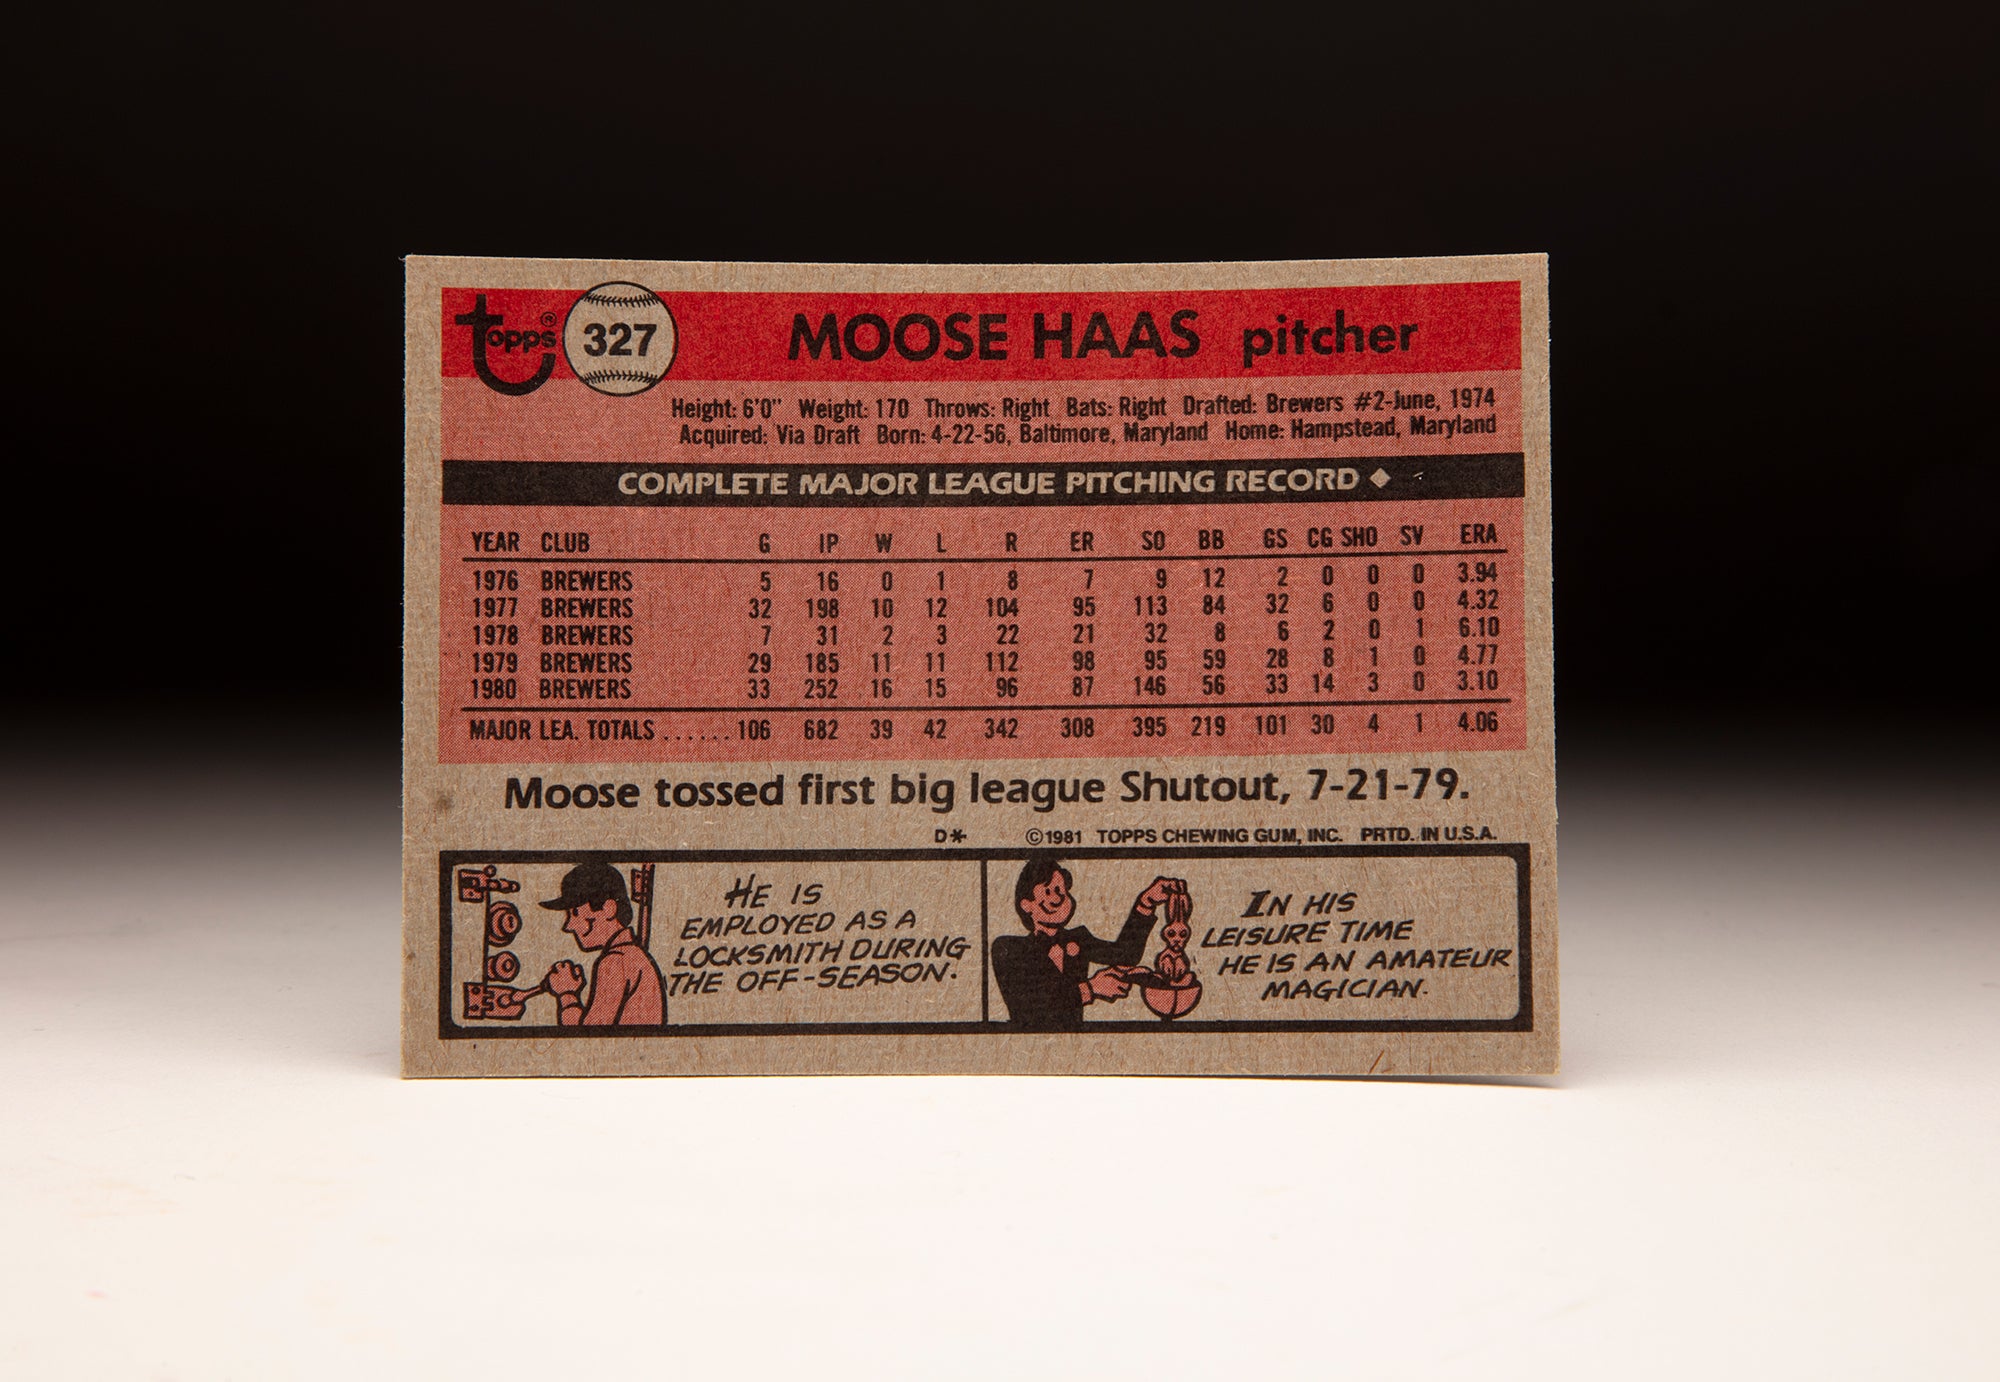 Back of 1981 Topps Moose Haas baseball card showing his statistics through the 1980 season. Fun facts: "He is employed as a locksmith during the off-season." and "In his leisure time he is an amateur magician."